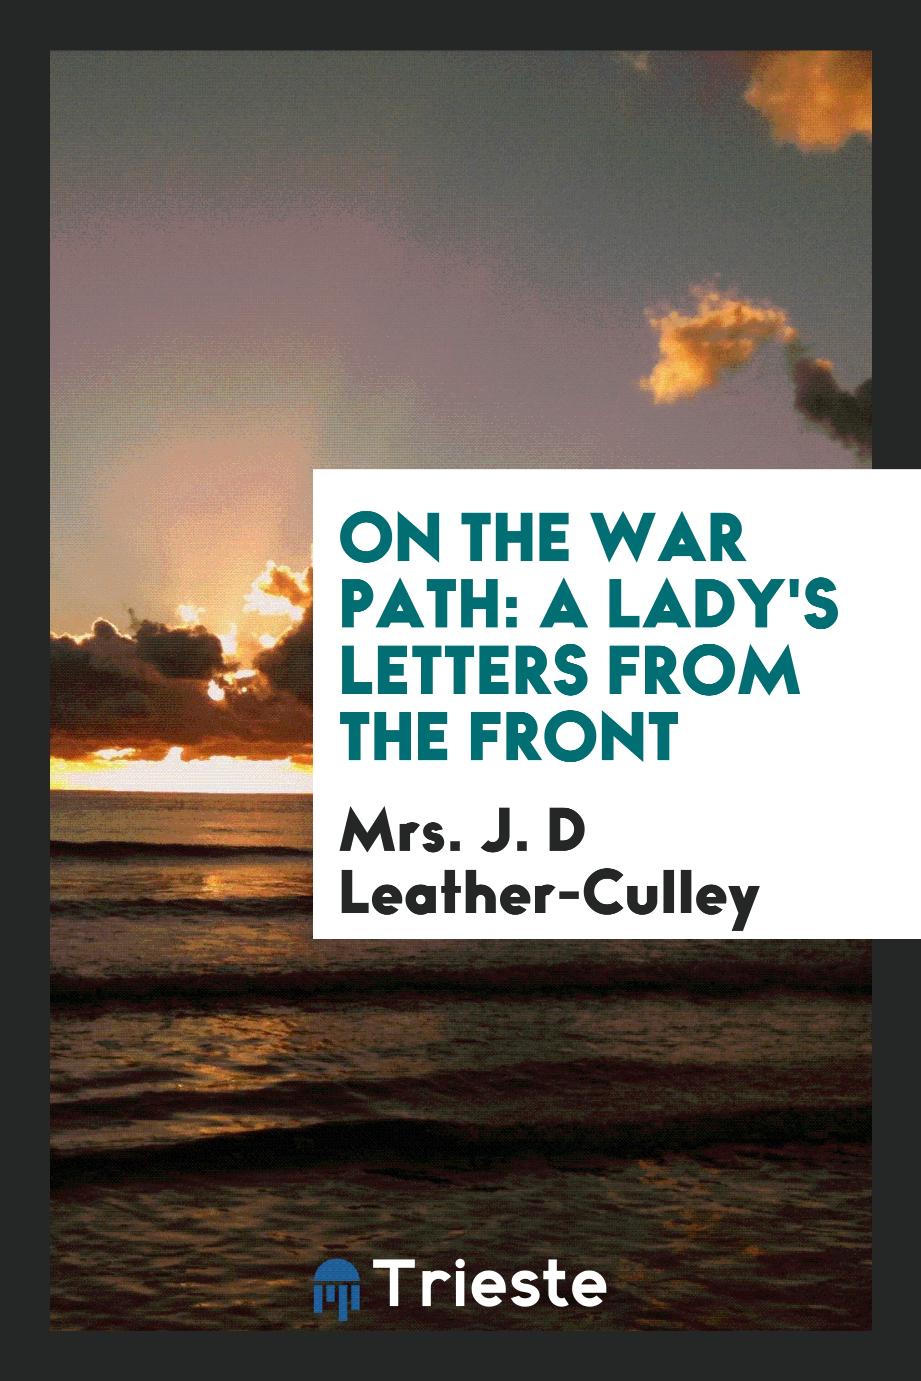 On the War Path: A Lady's Letters from the Front